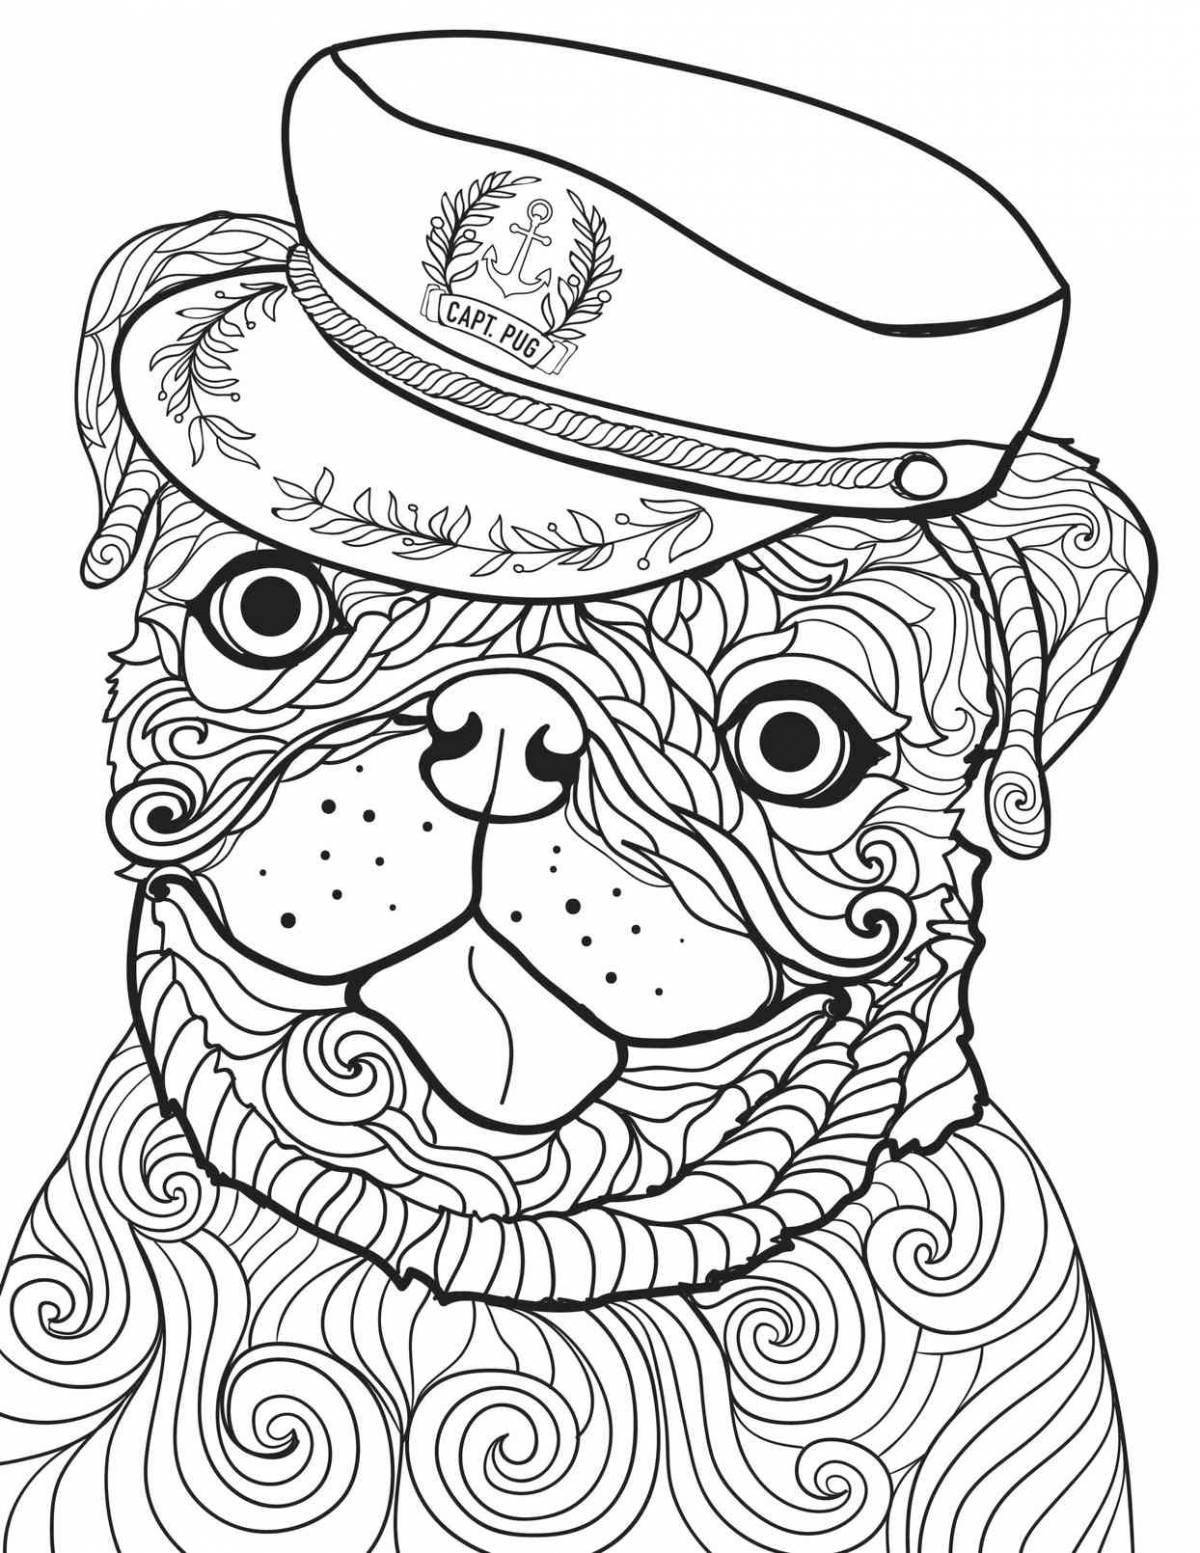 Coloring page jubilant pug for the new year